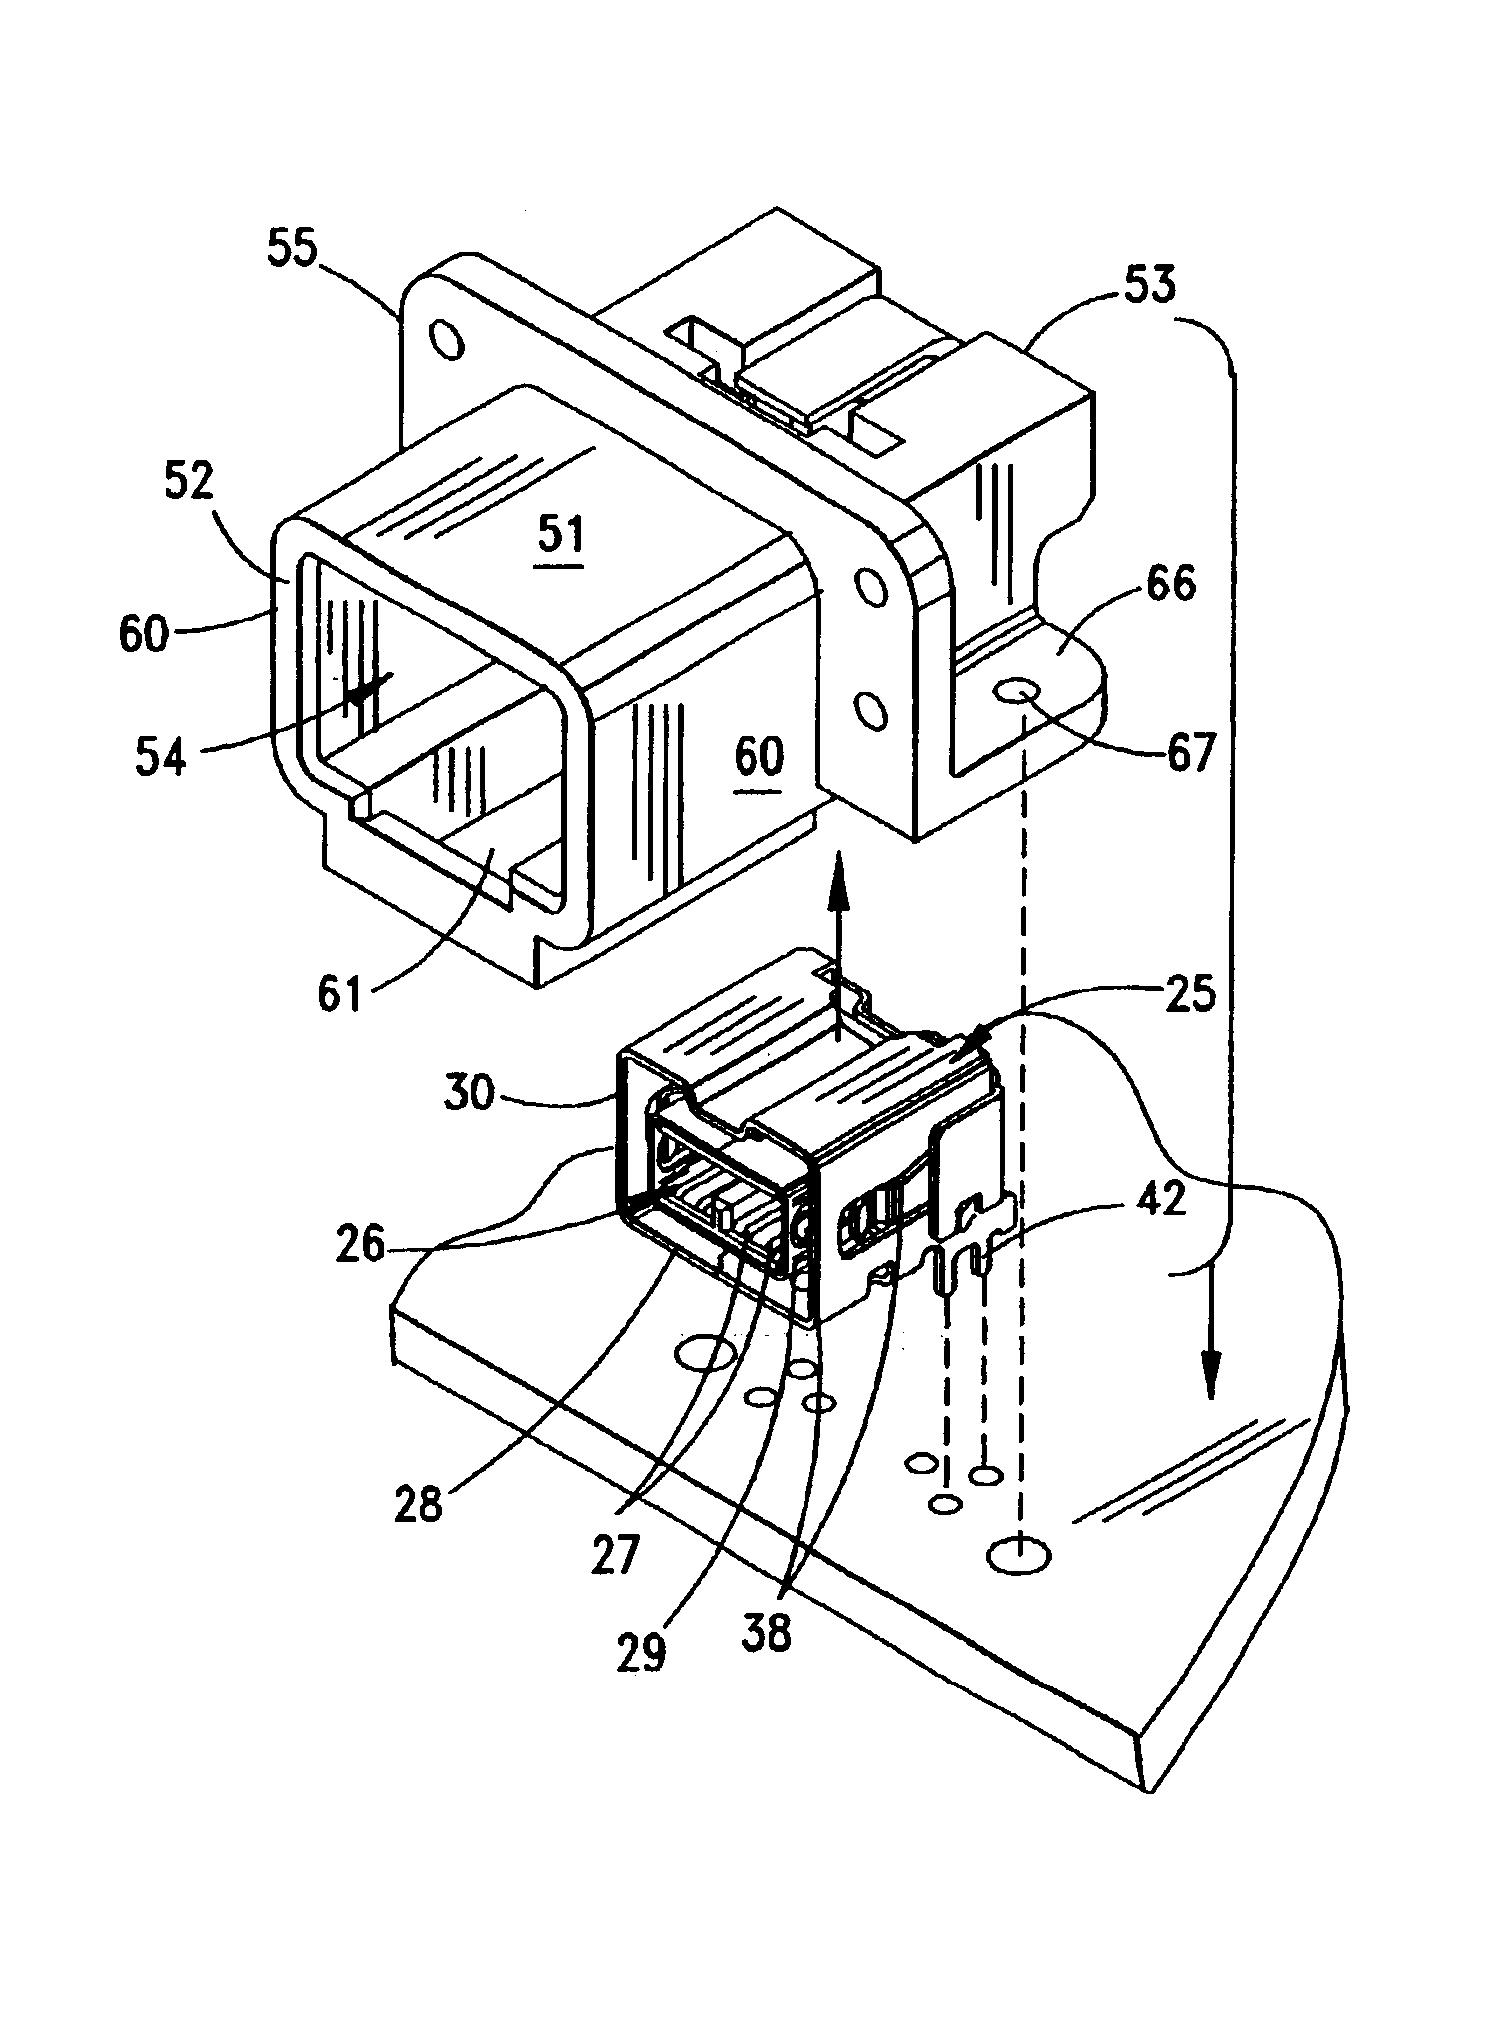 Automotive connector with improved retention ability